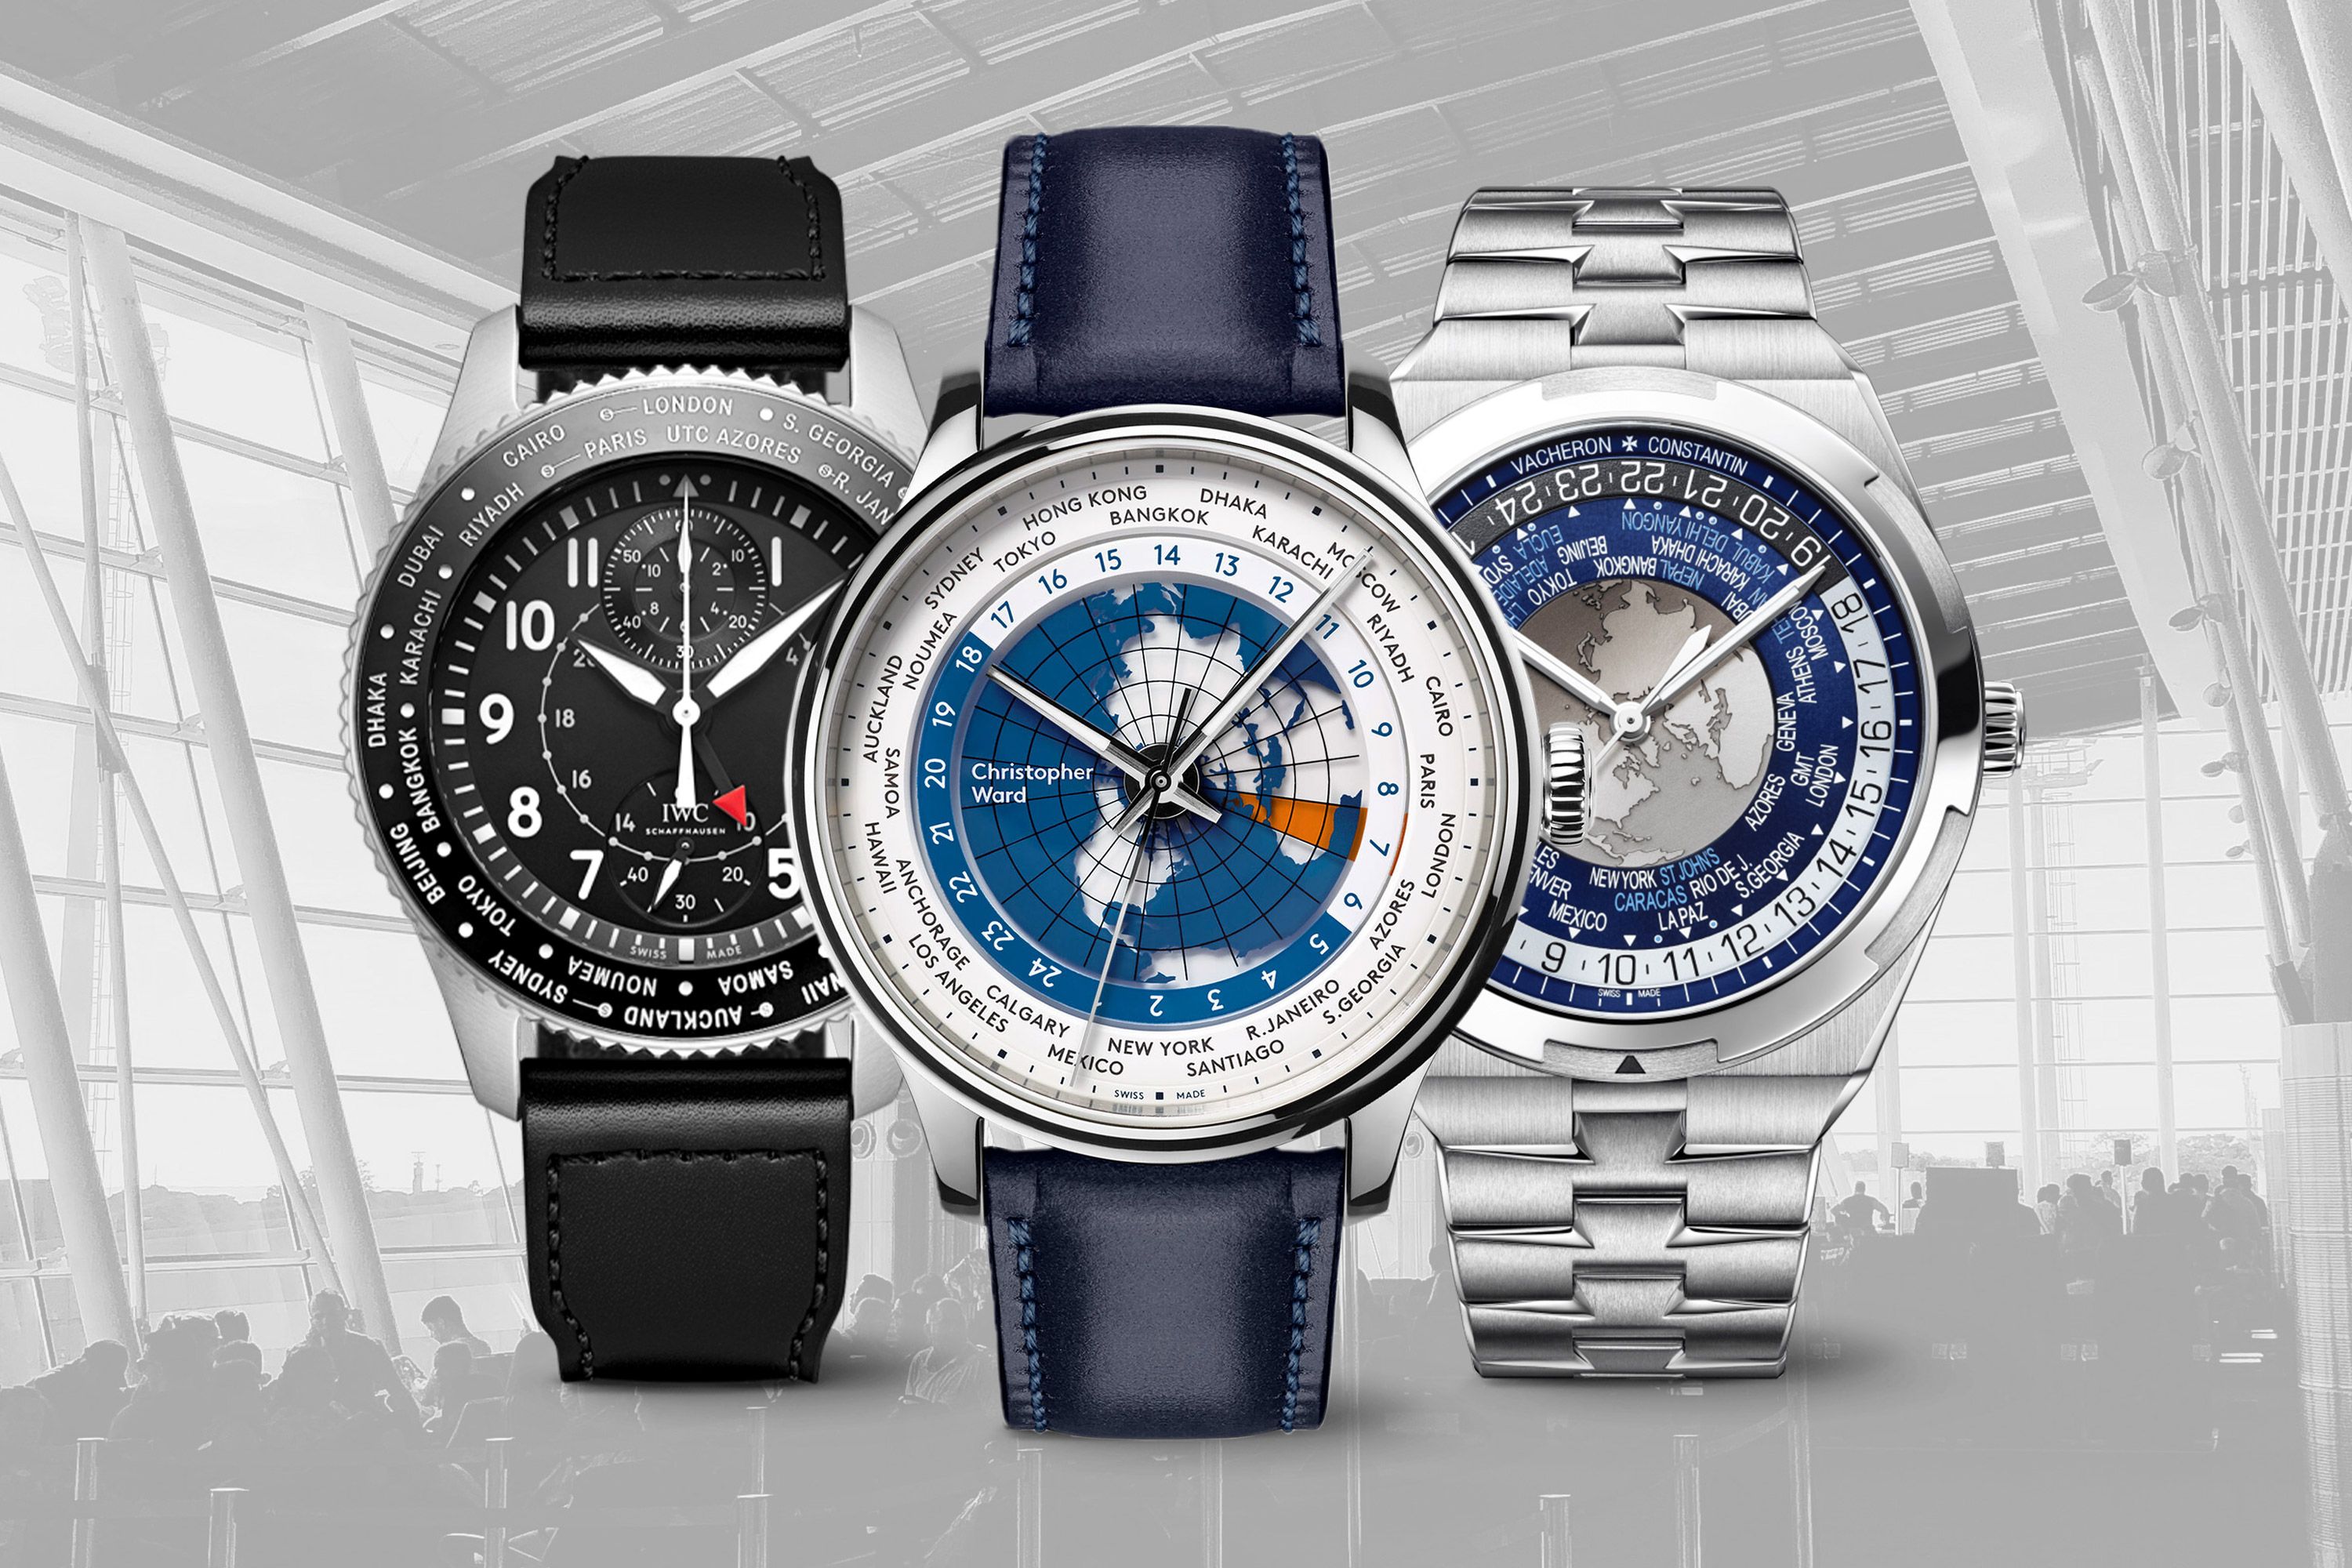 Travel In Style With These Seven Incredible World Time Watches